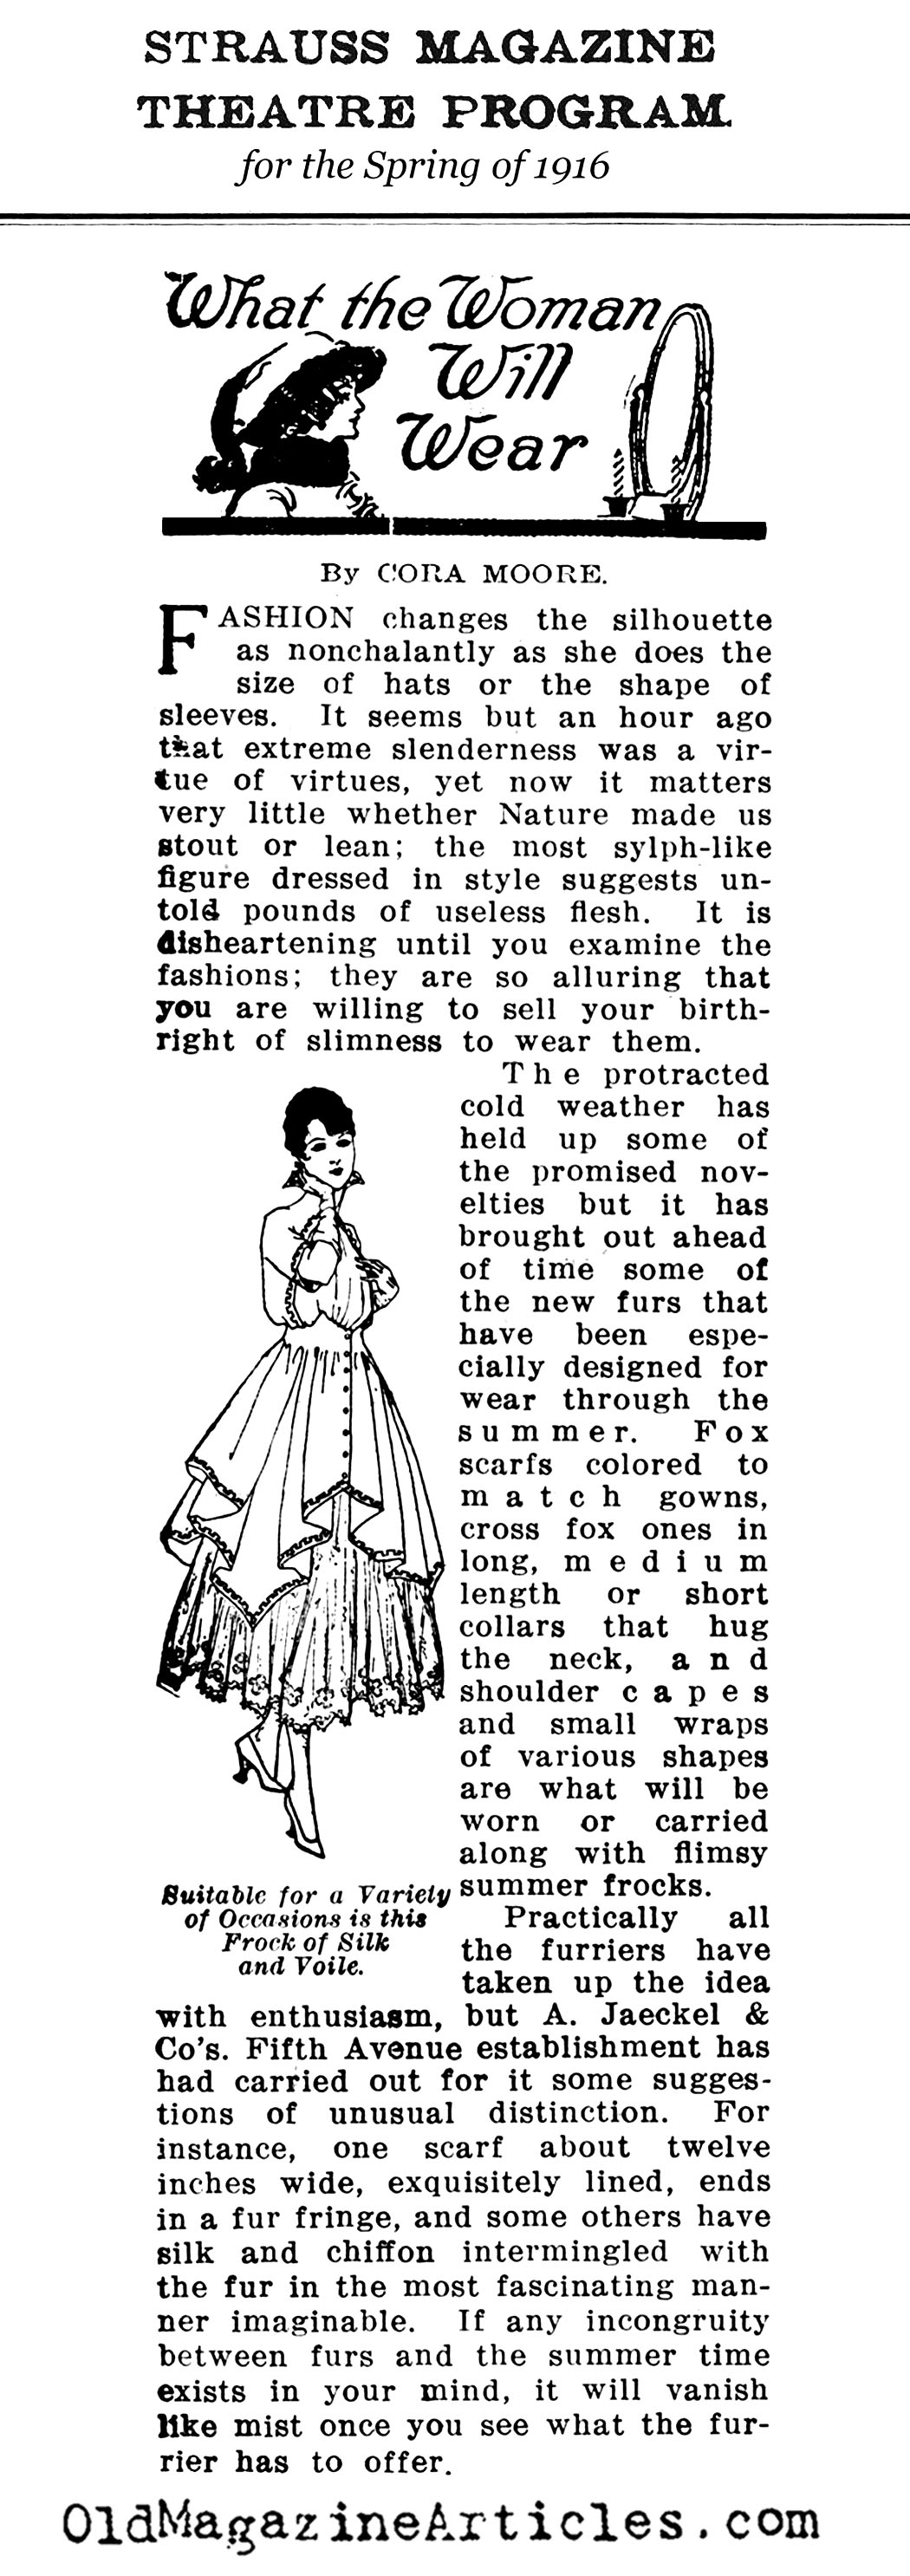 World War I Fashions in the Spring of 1916 (Strauss Magazine, 1916)